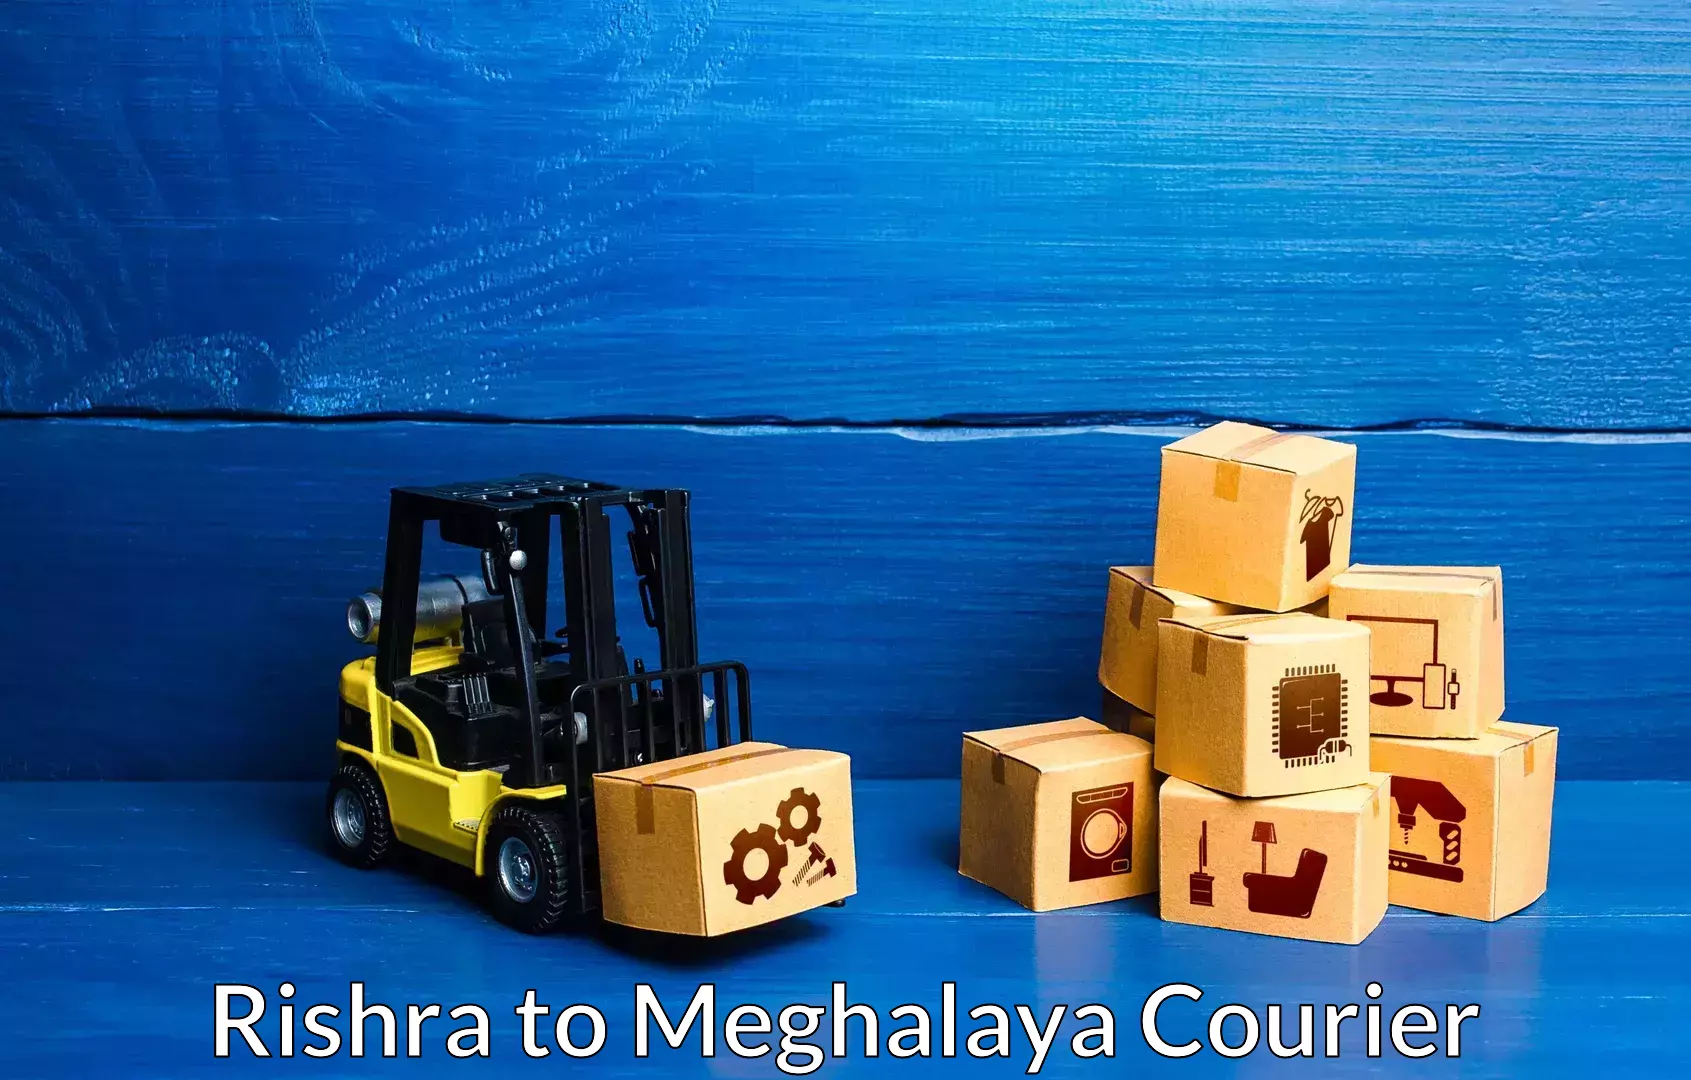 Furniture transport specialists Rishra to Shillong